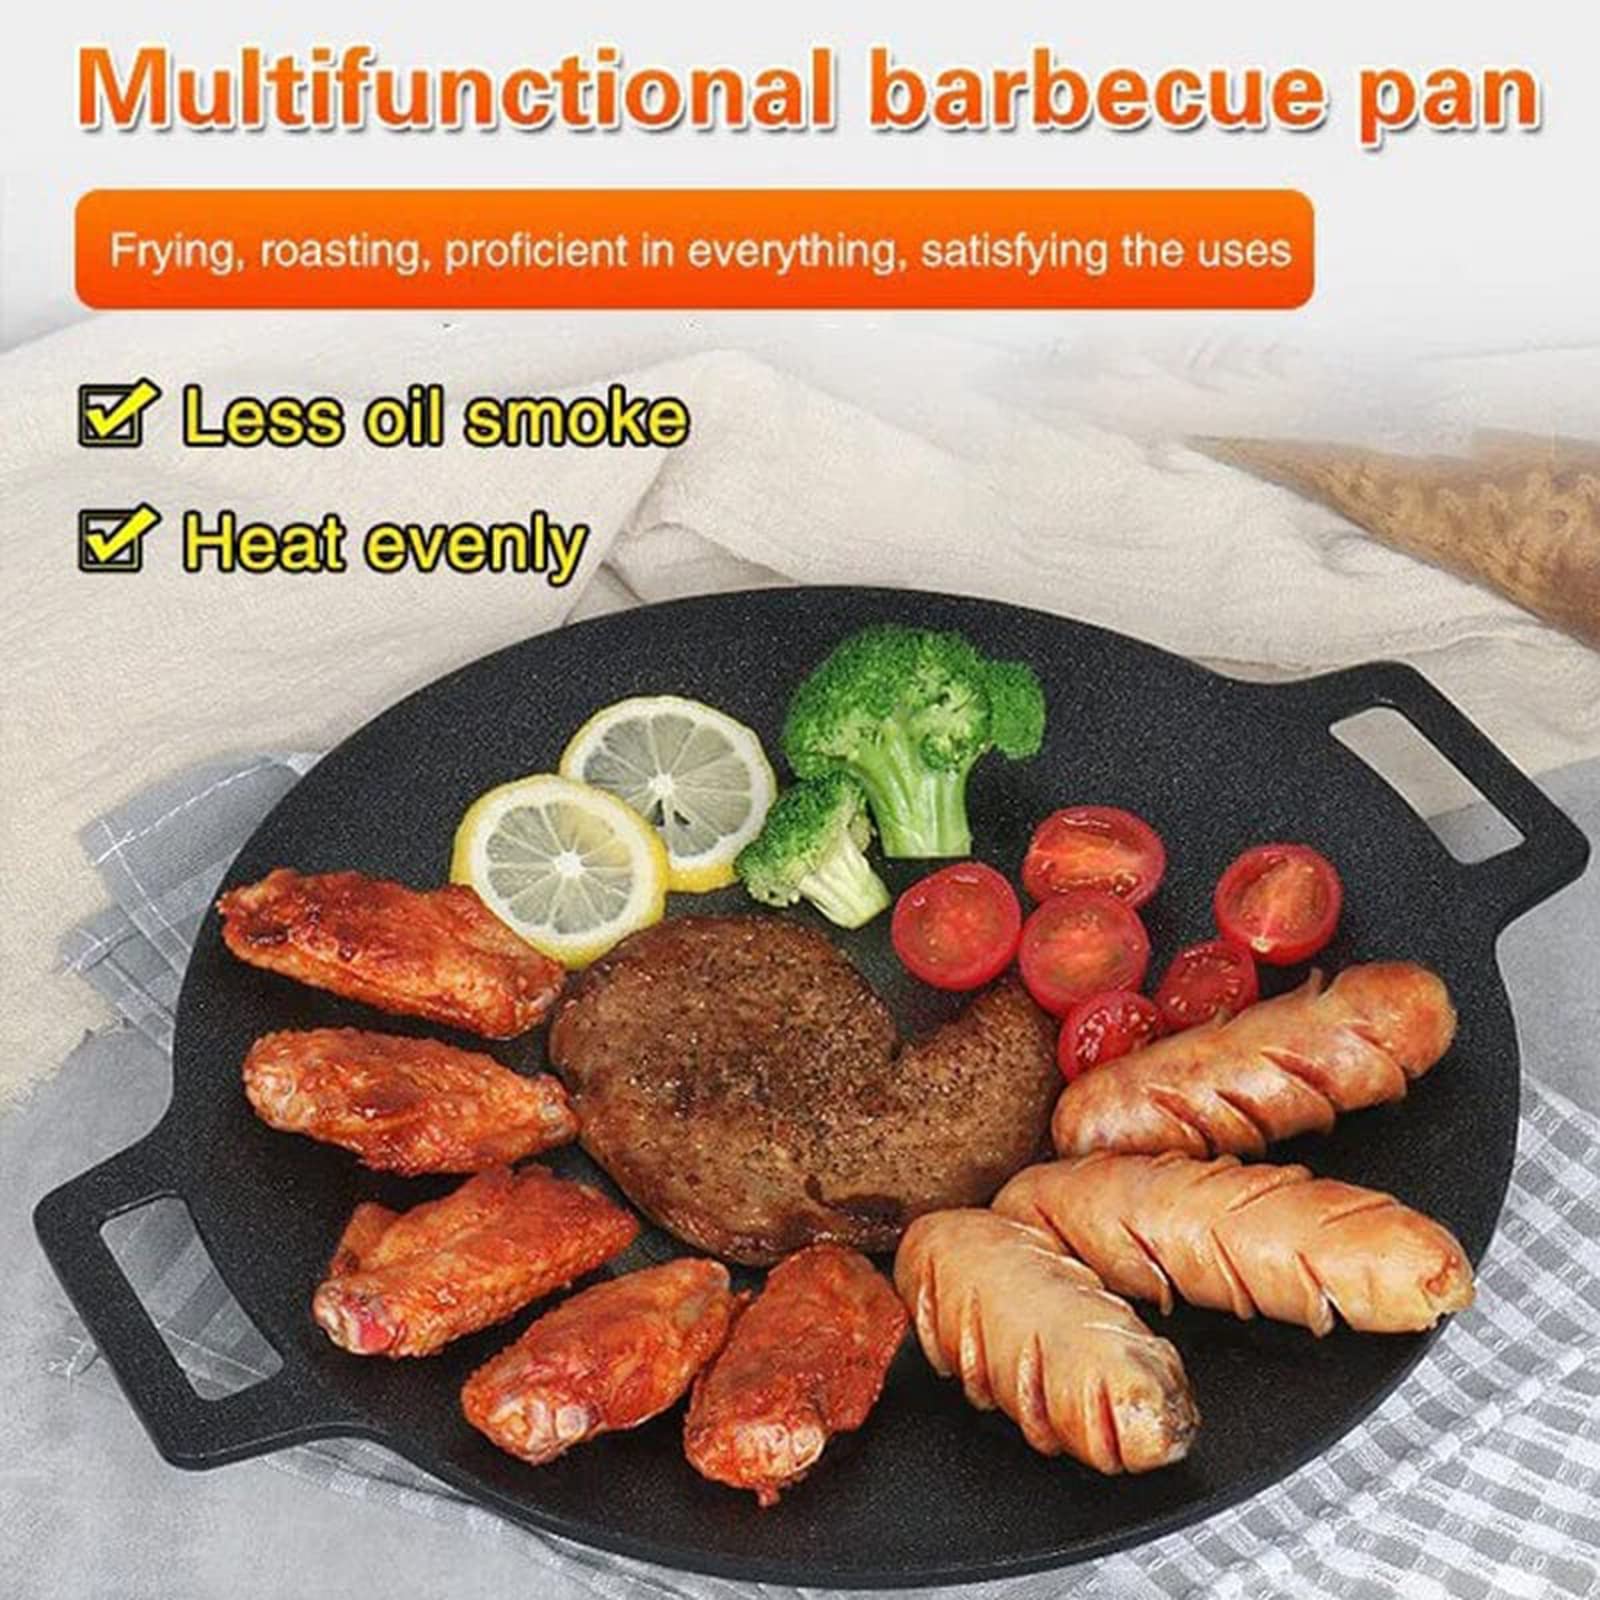 Korean Non-stick Round Baking Pan, 8 in 1 Korean BBQ Grill Pan,Non-stick Granite Coating,Round Griddle Pan, for Both Home and Outdoor stoves Grilling, Frying, Sauteing (12 inches)